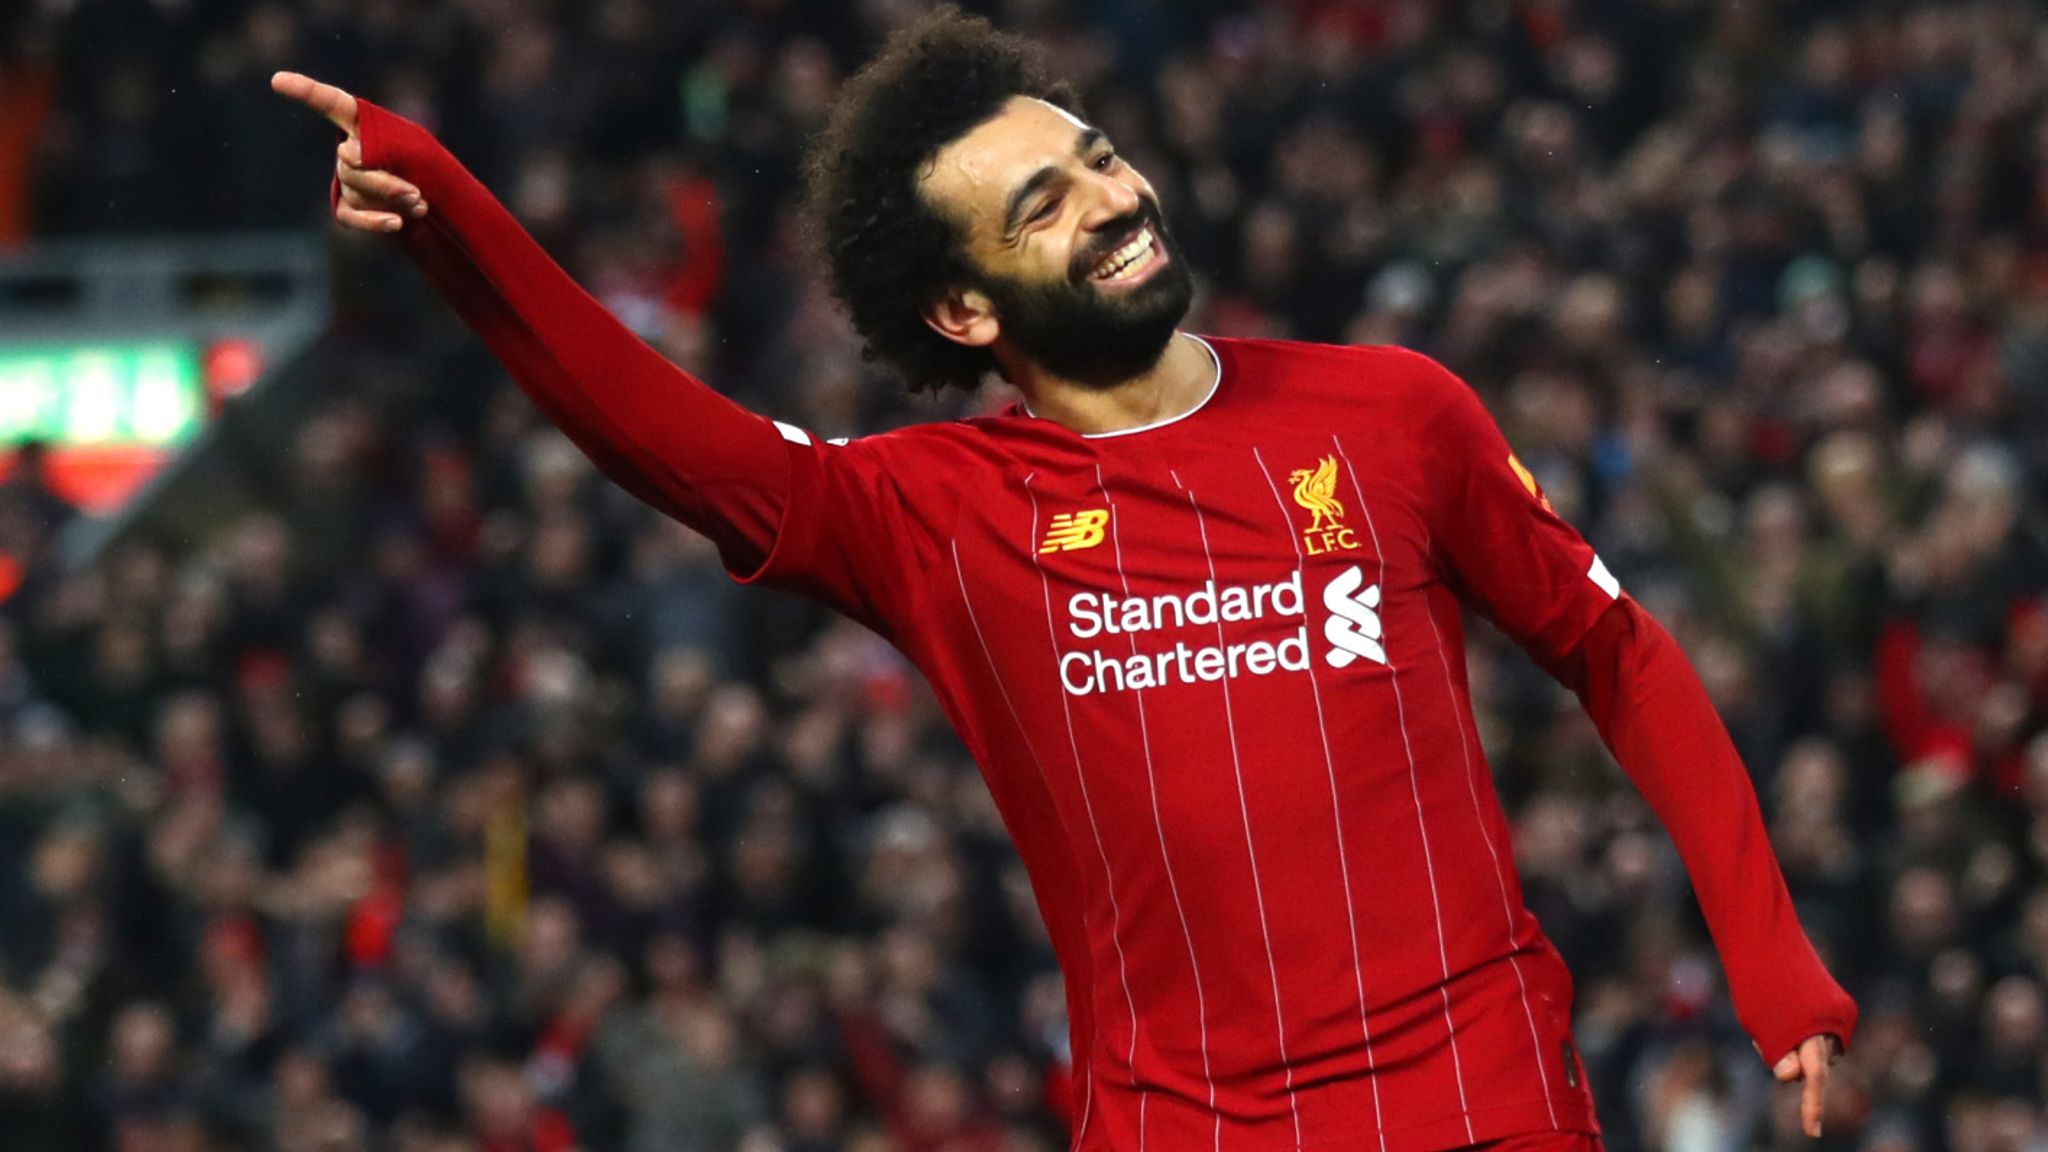 Mohamed Salah: Liverpool Title Win An 'unbelievable Feeling' After Shedding Tears When 2018 19 Hopes Slipped Away